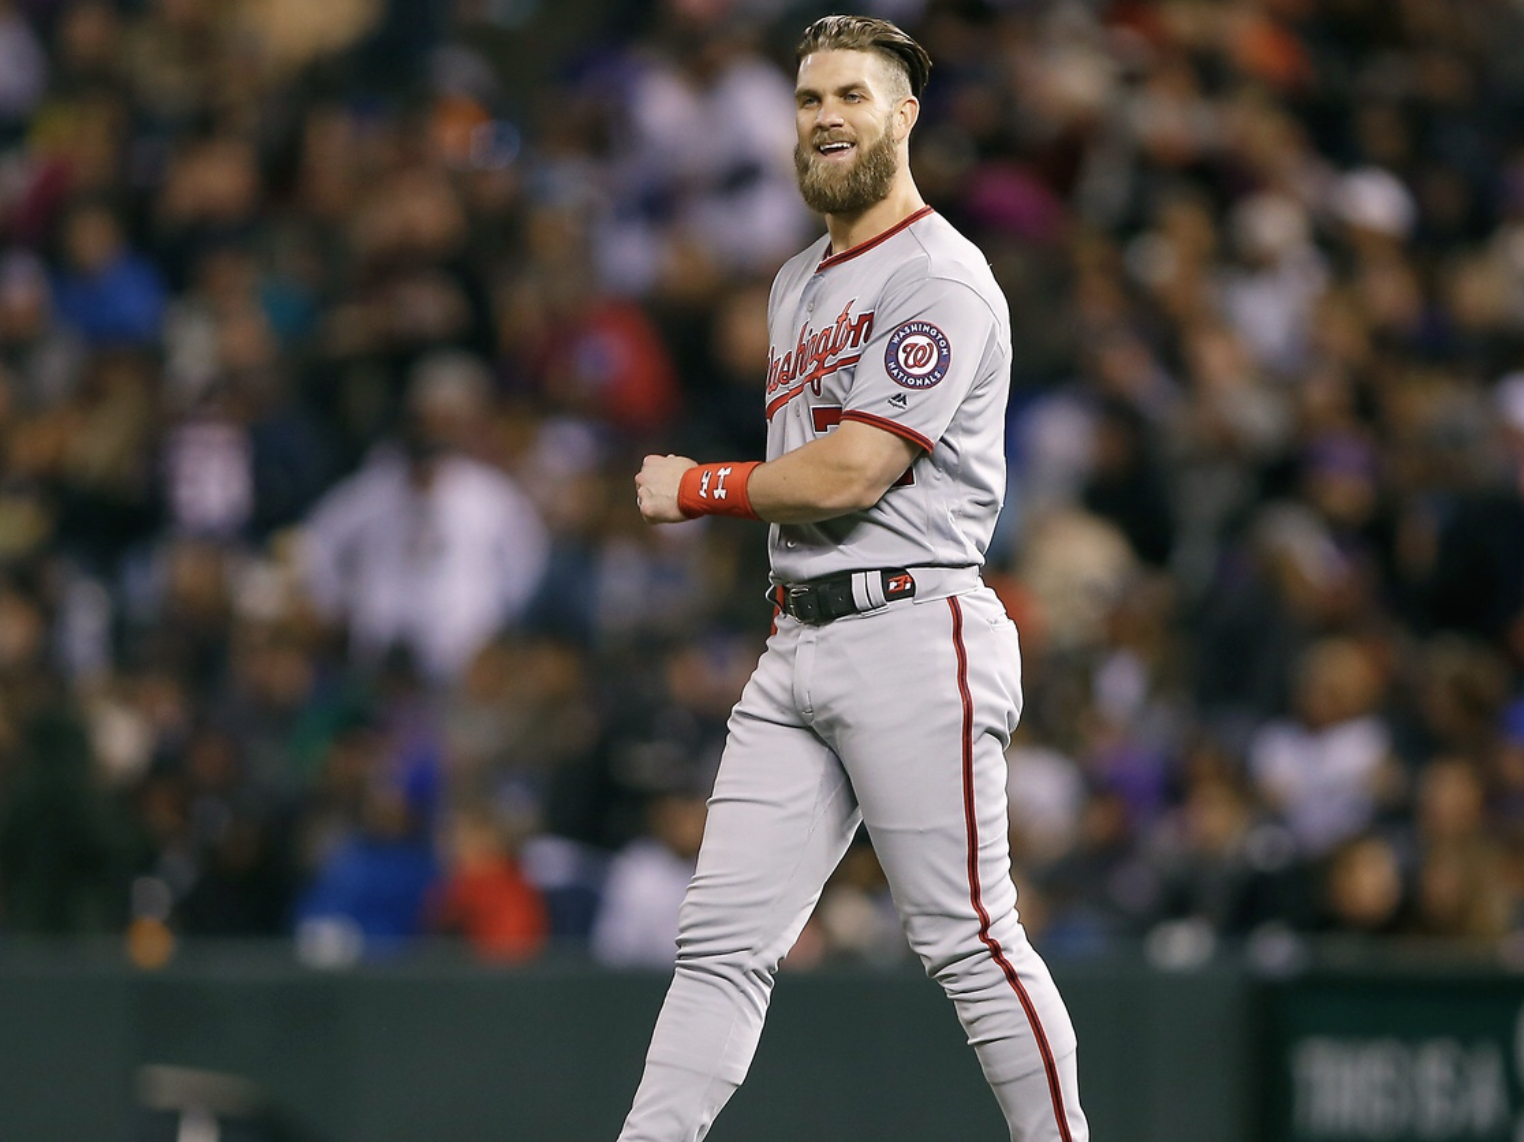 Giants are odds-on favorites to land Bryce Harper